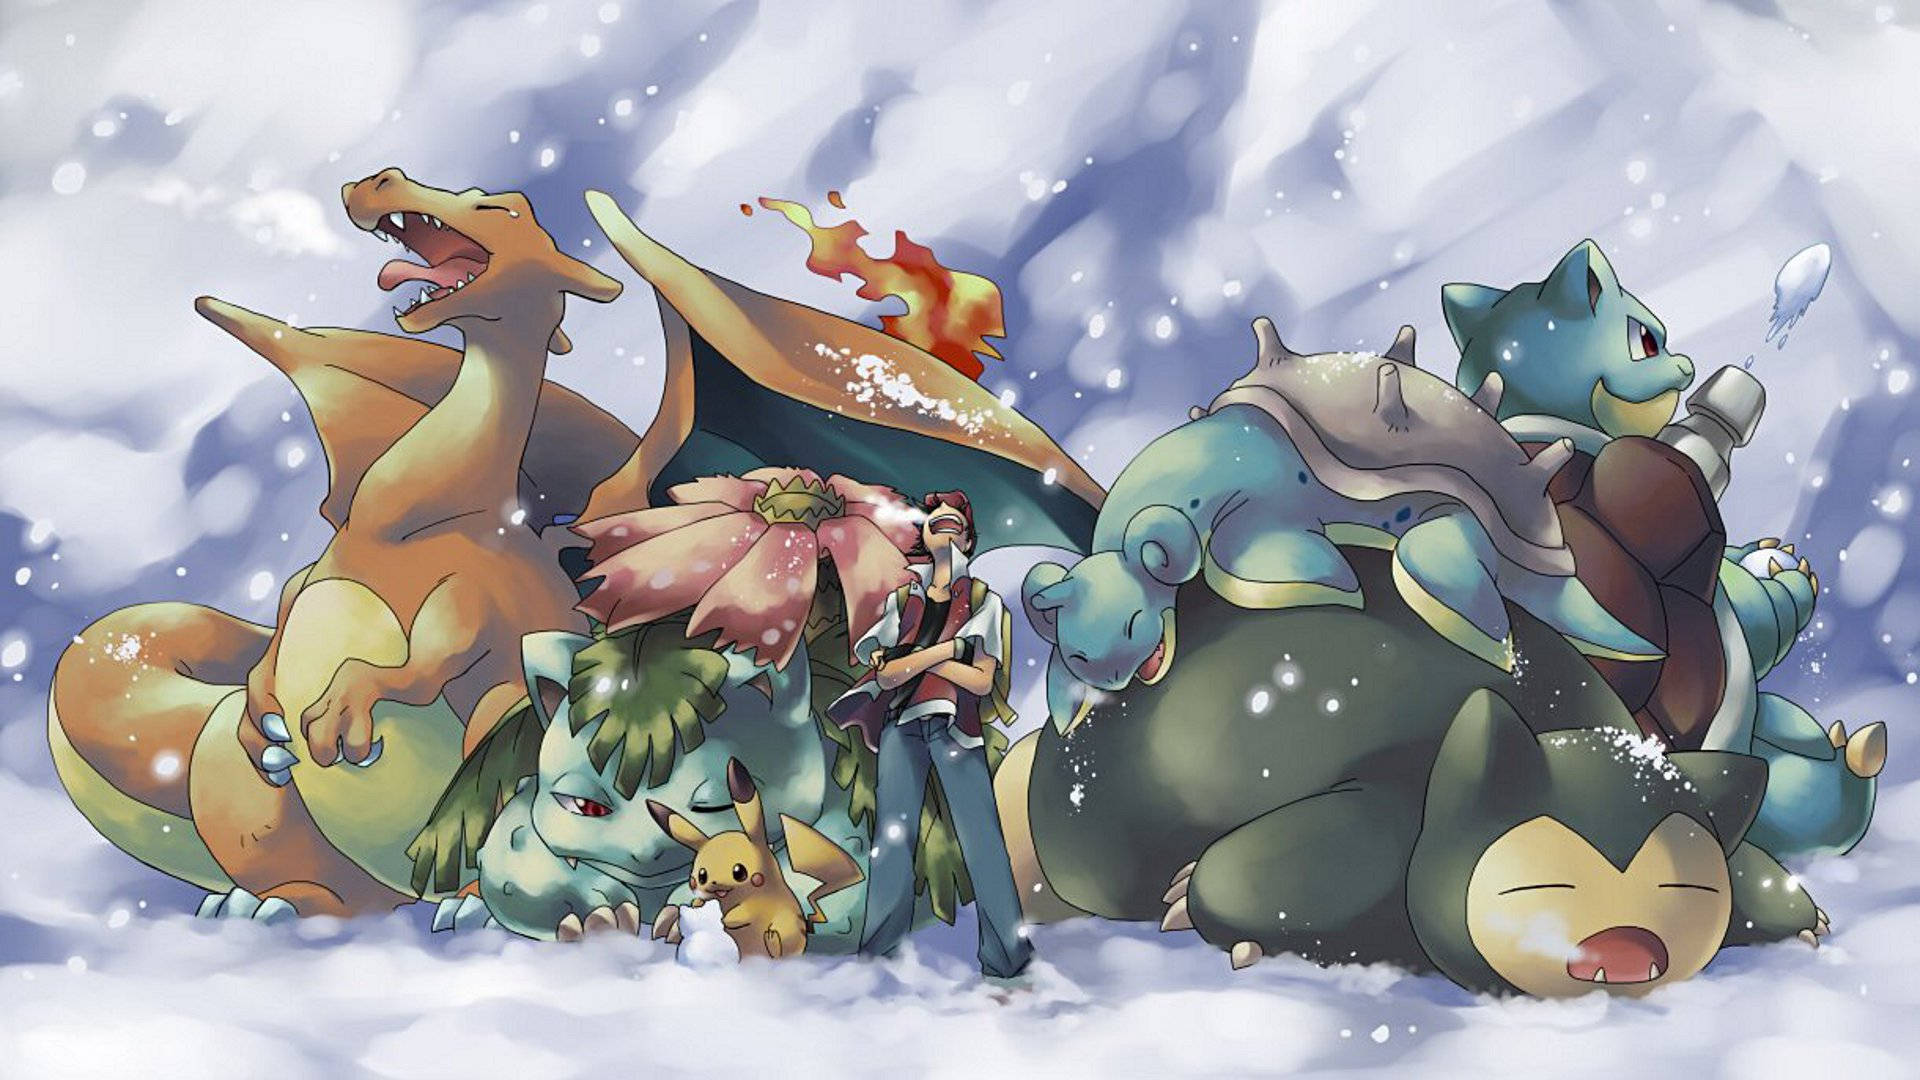 Pokemon Creature In Snow With Charizard Background